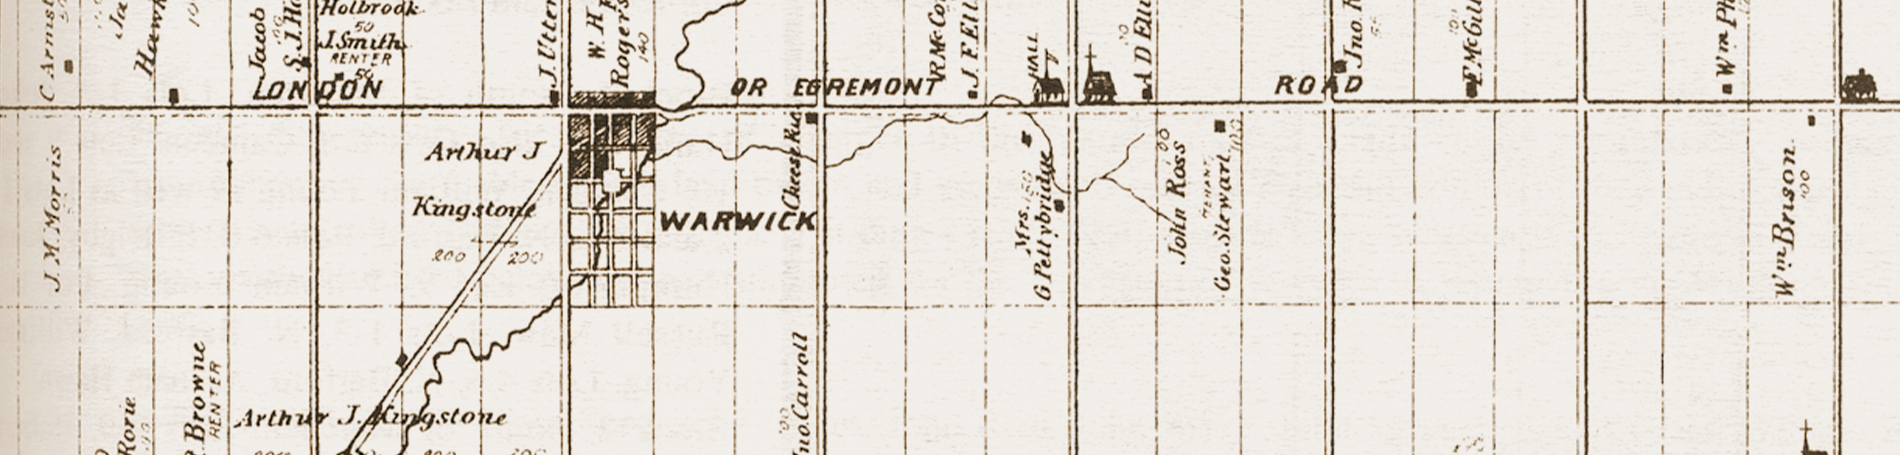 Map of Warwick Township area.